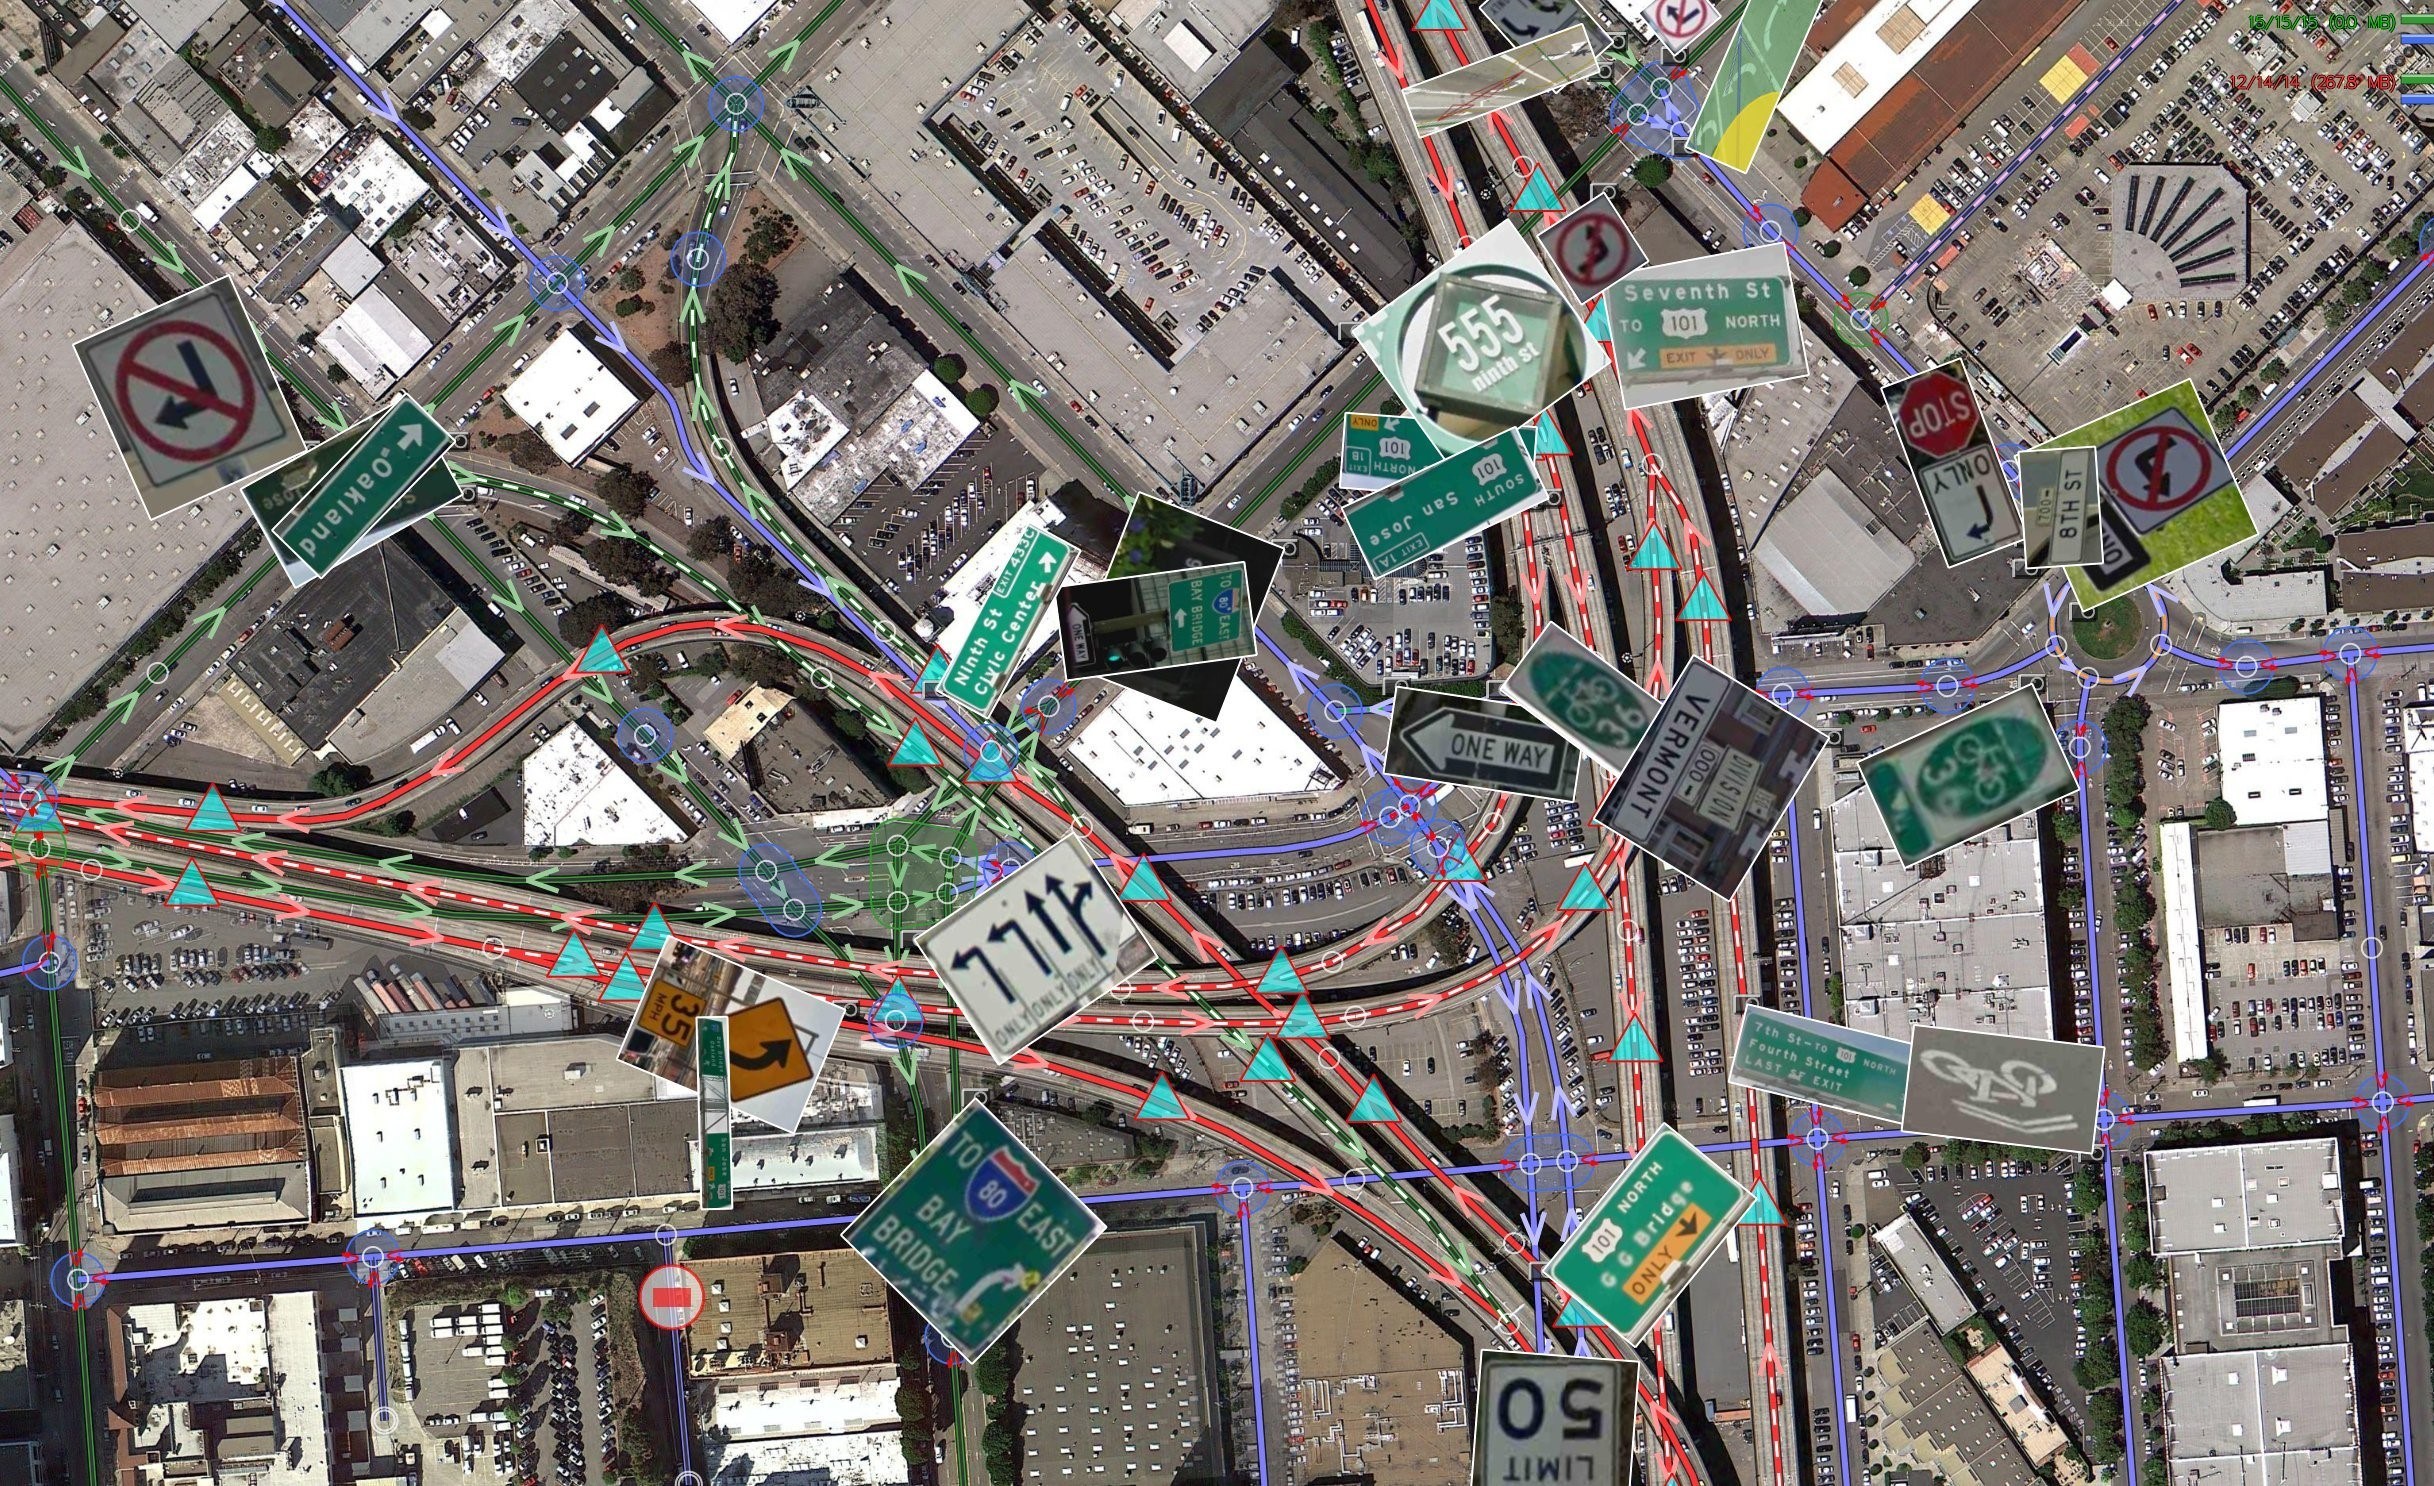 Pic 2 - Map of downtown San Francisco as created by Google Street View [2]